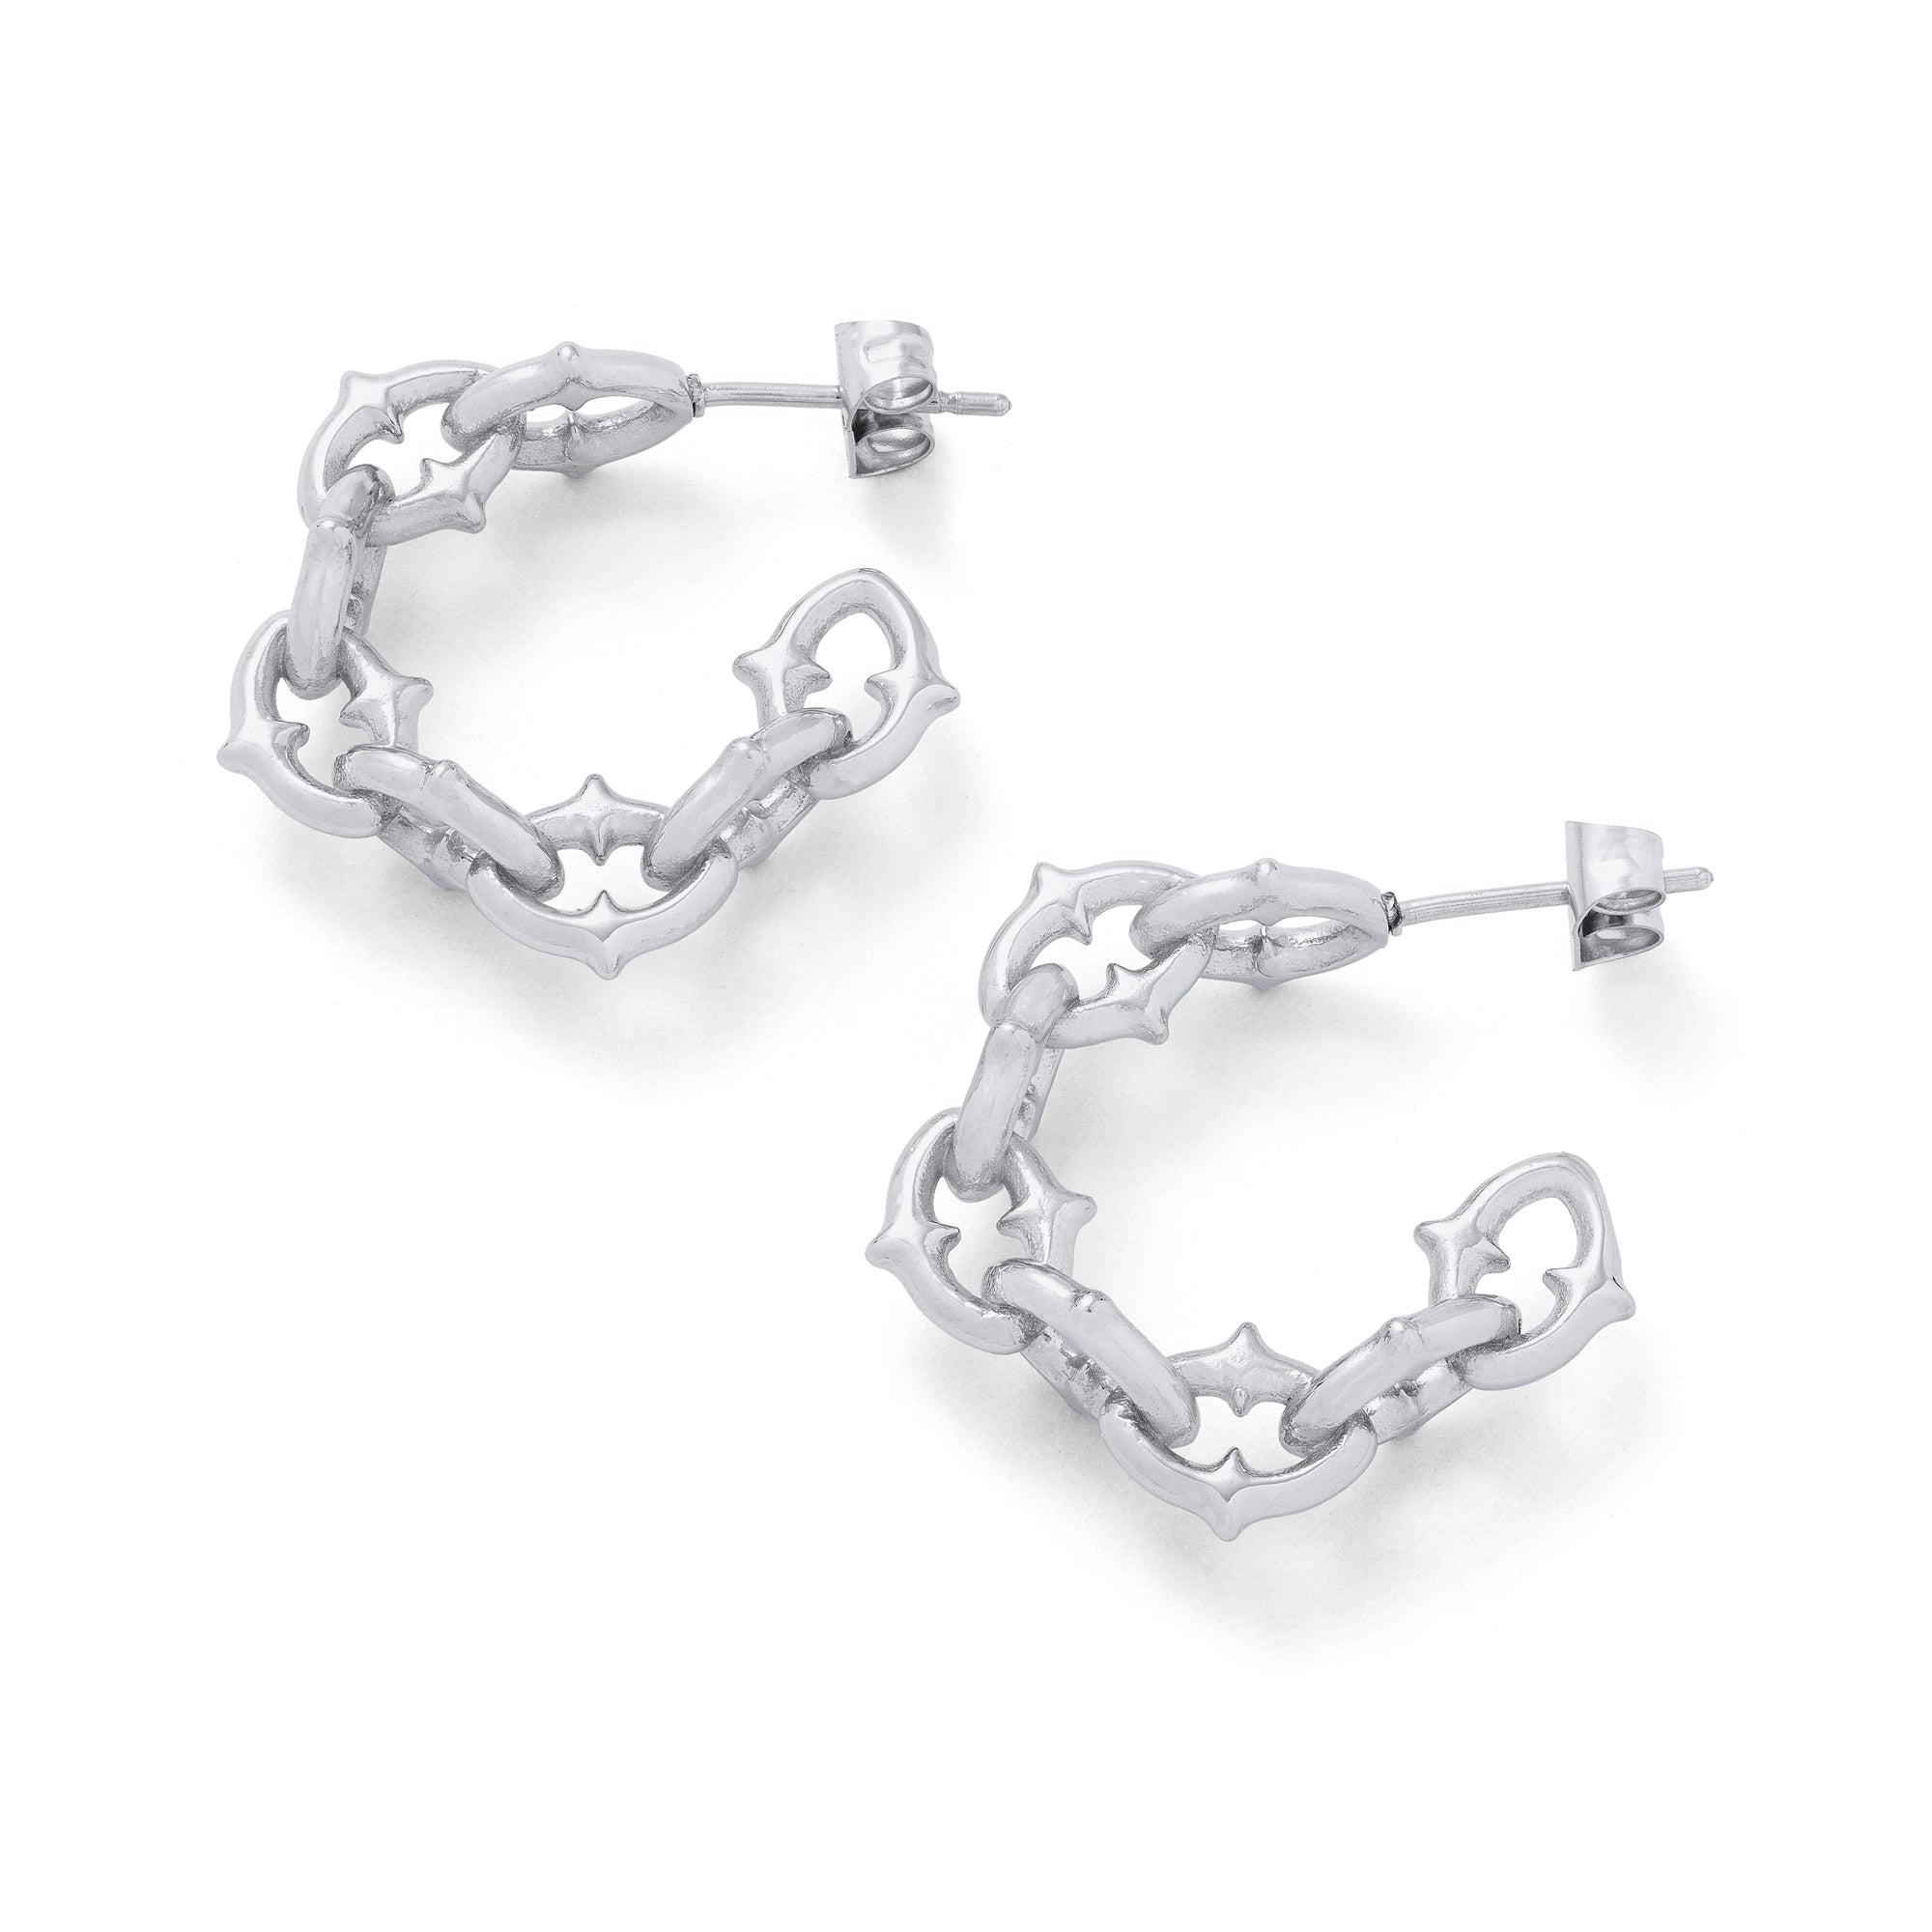 Gothic spiked chain hoop earrings